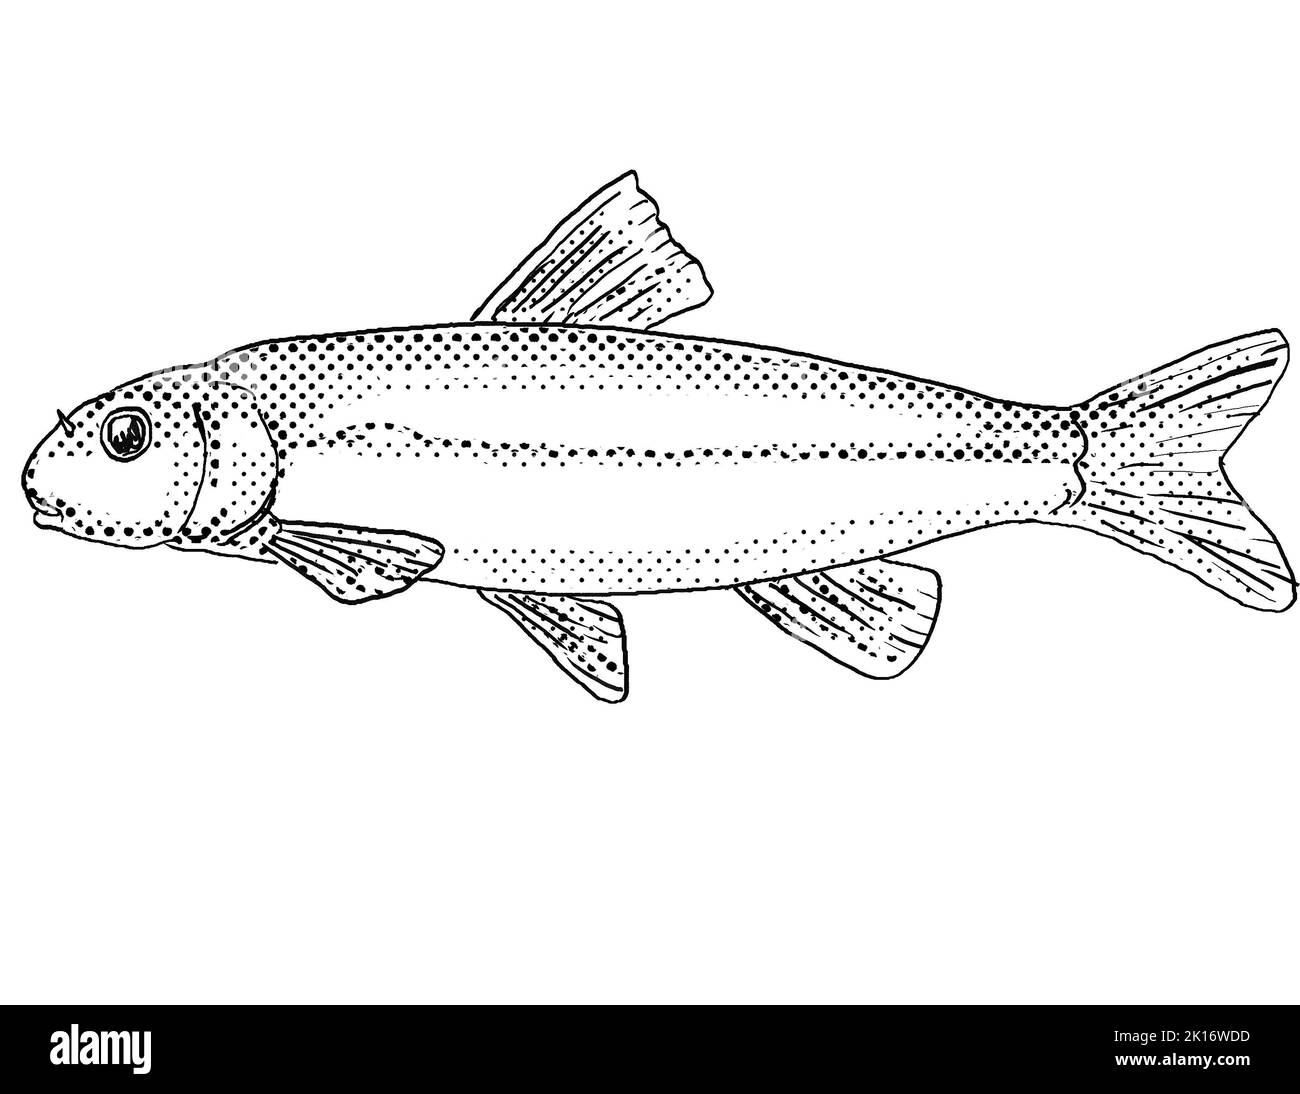 Cartoon style line drawing of a Exoglossum maxillingua or cutlips minnow freshwater fish endemic to North America with halftone dots shading on isolat Stock Photo